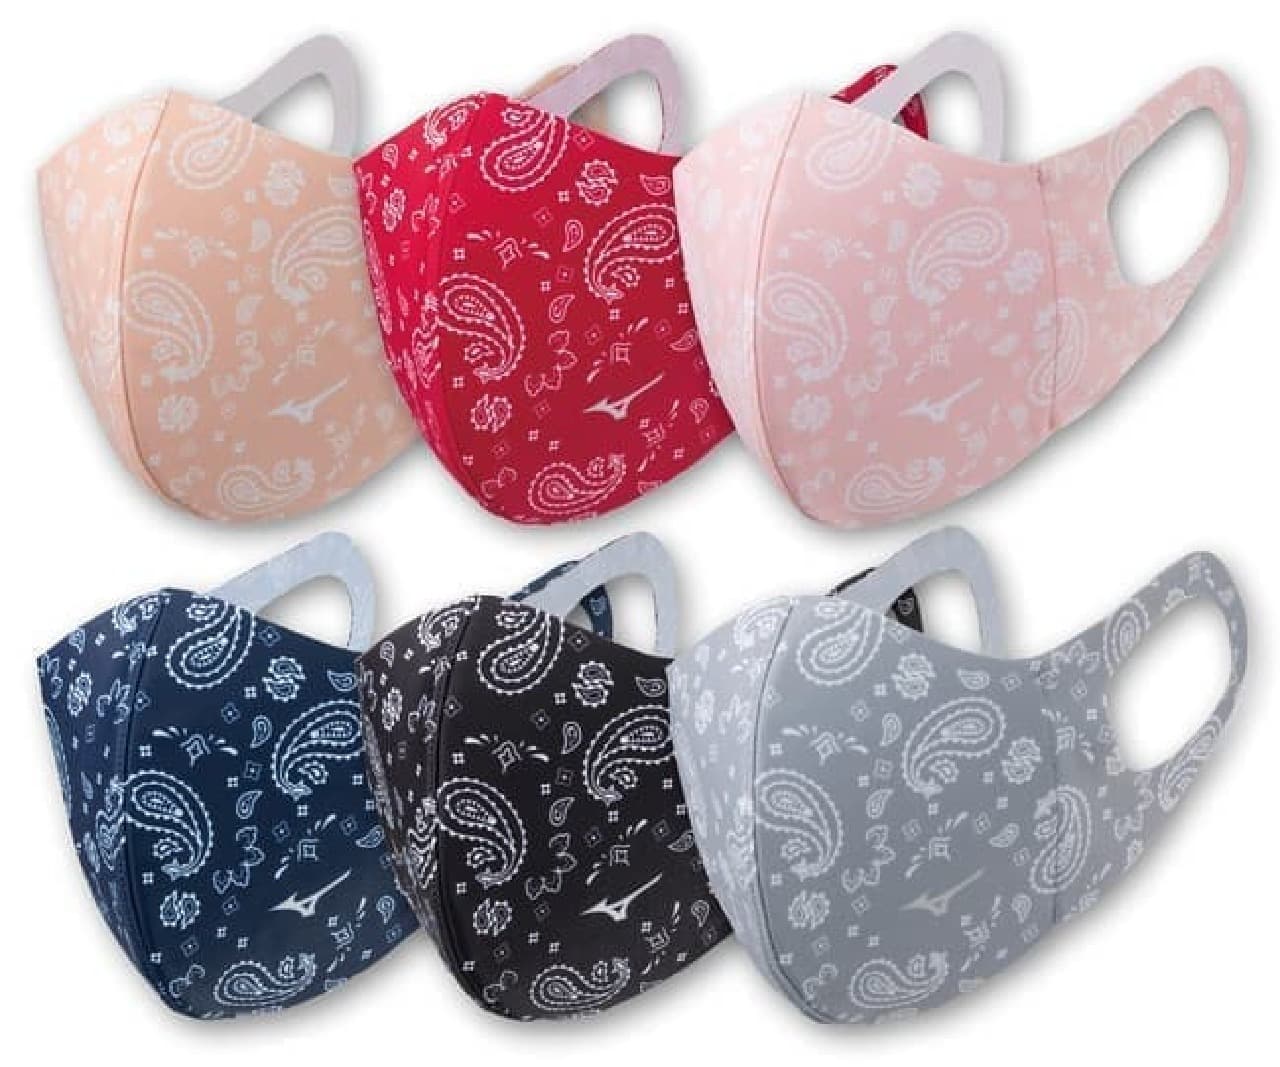 Released "Mizuno Mouse Cover (Paisley Pattern)" --For an accent to your outfit